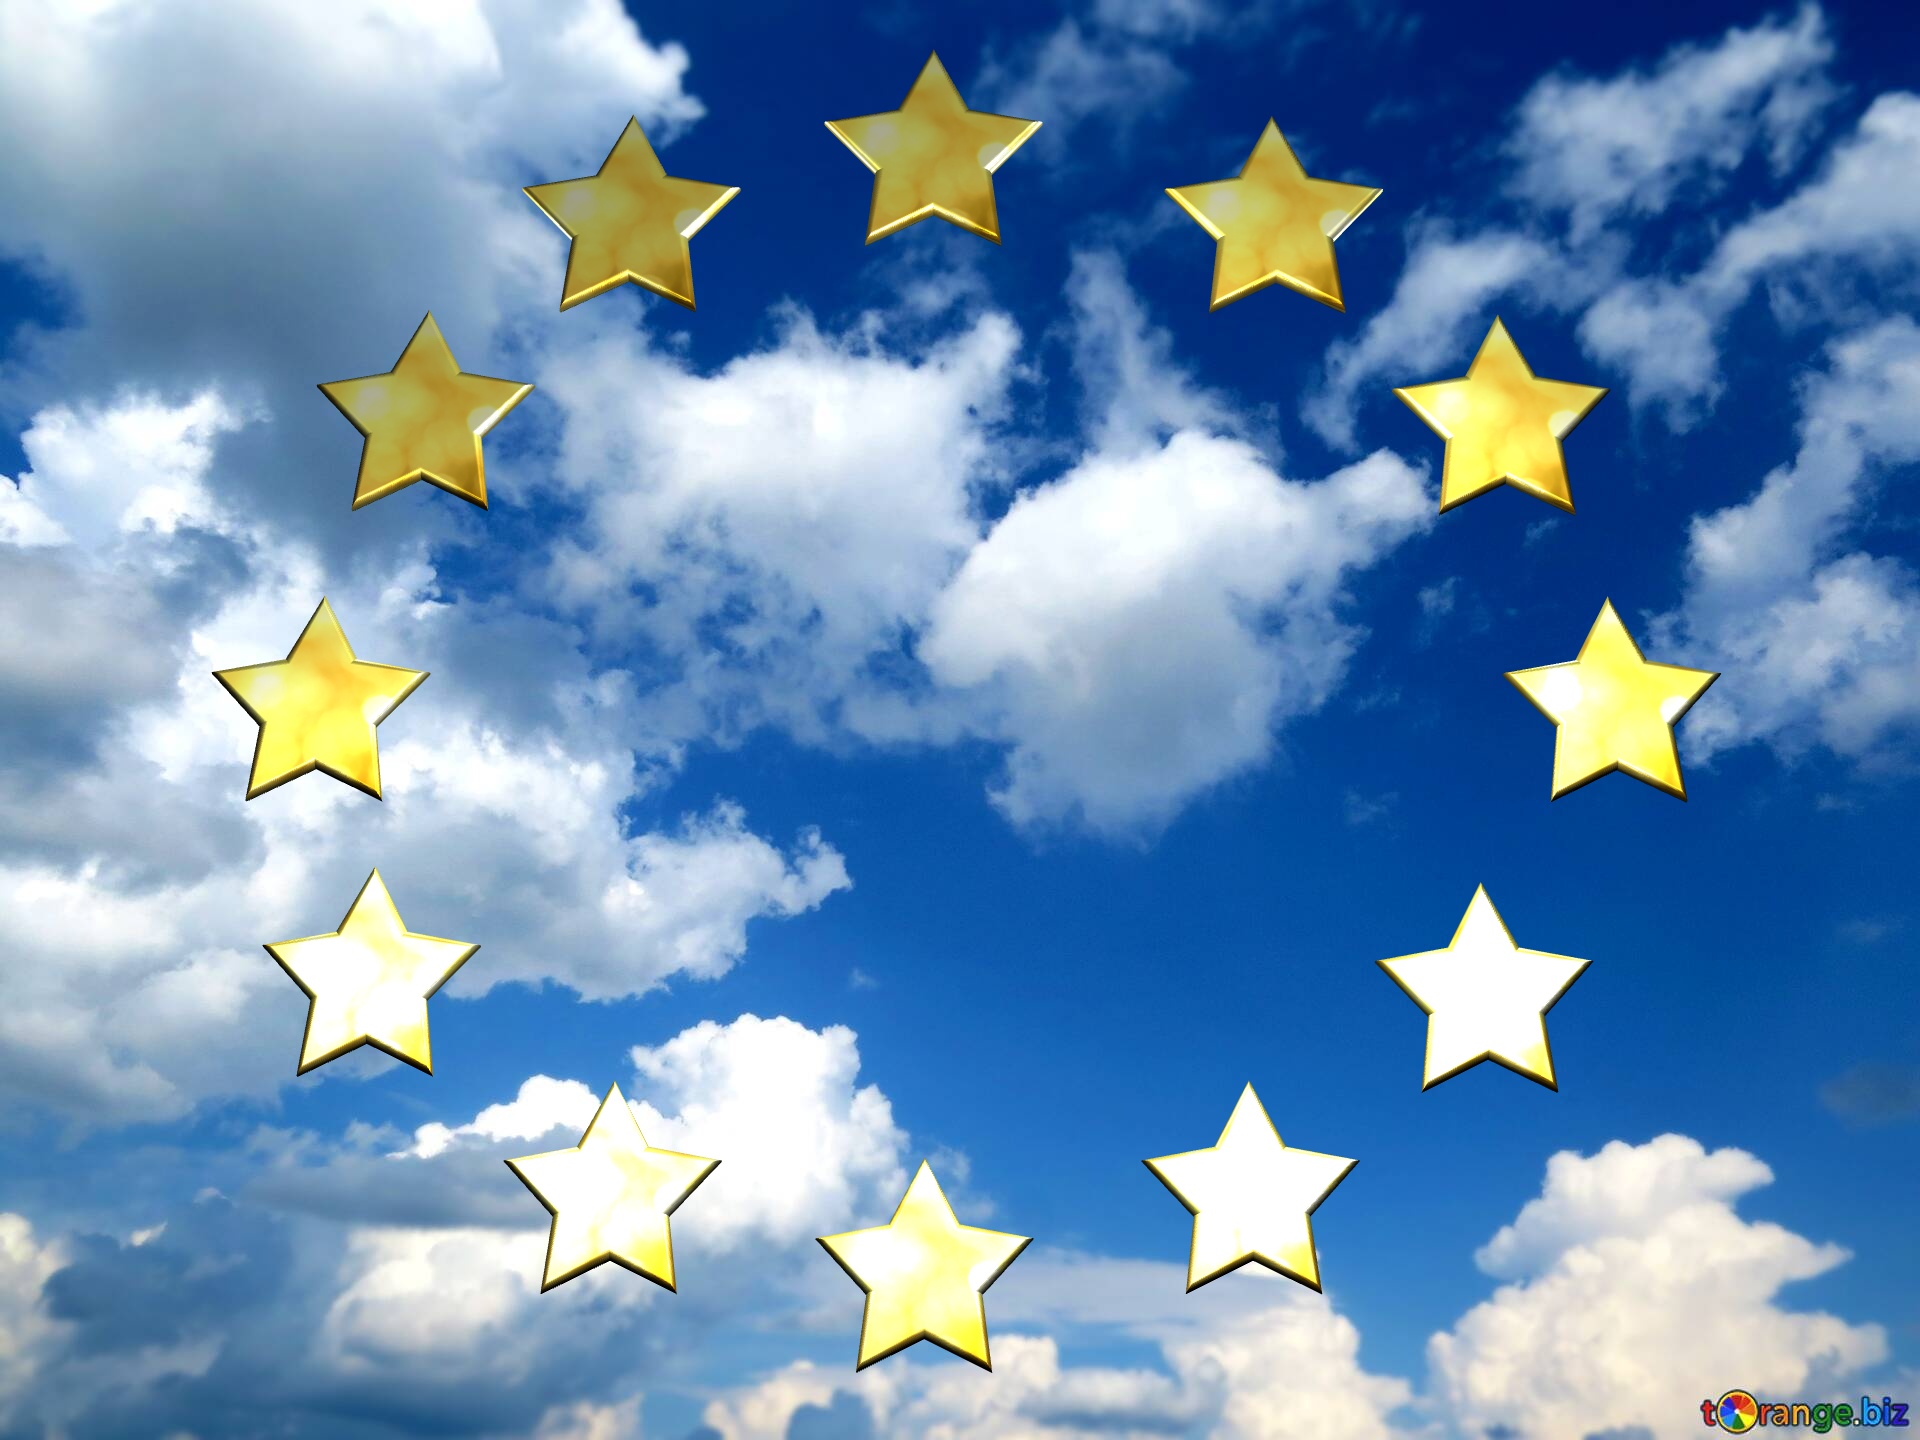 Europe symbol clear sky background №0